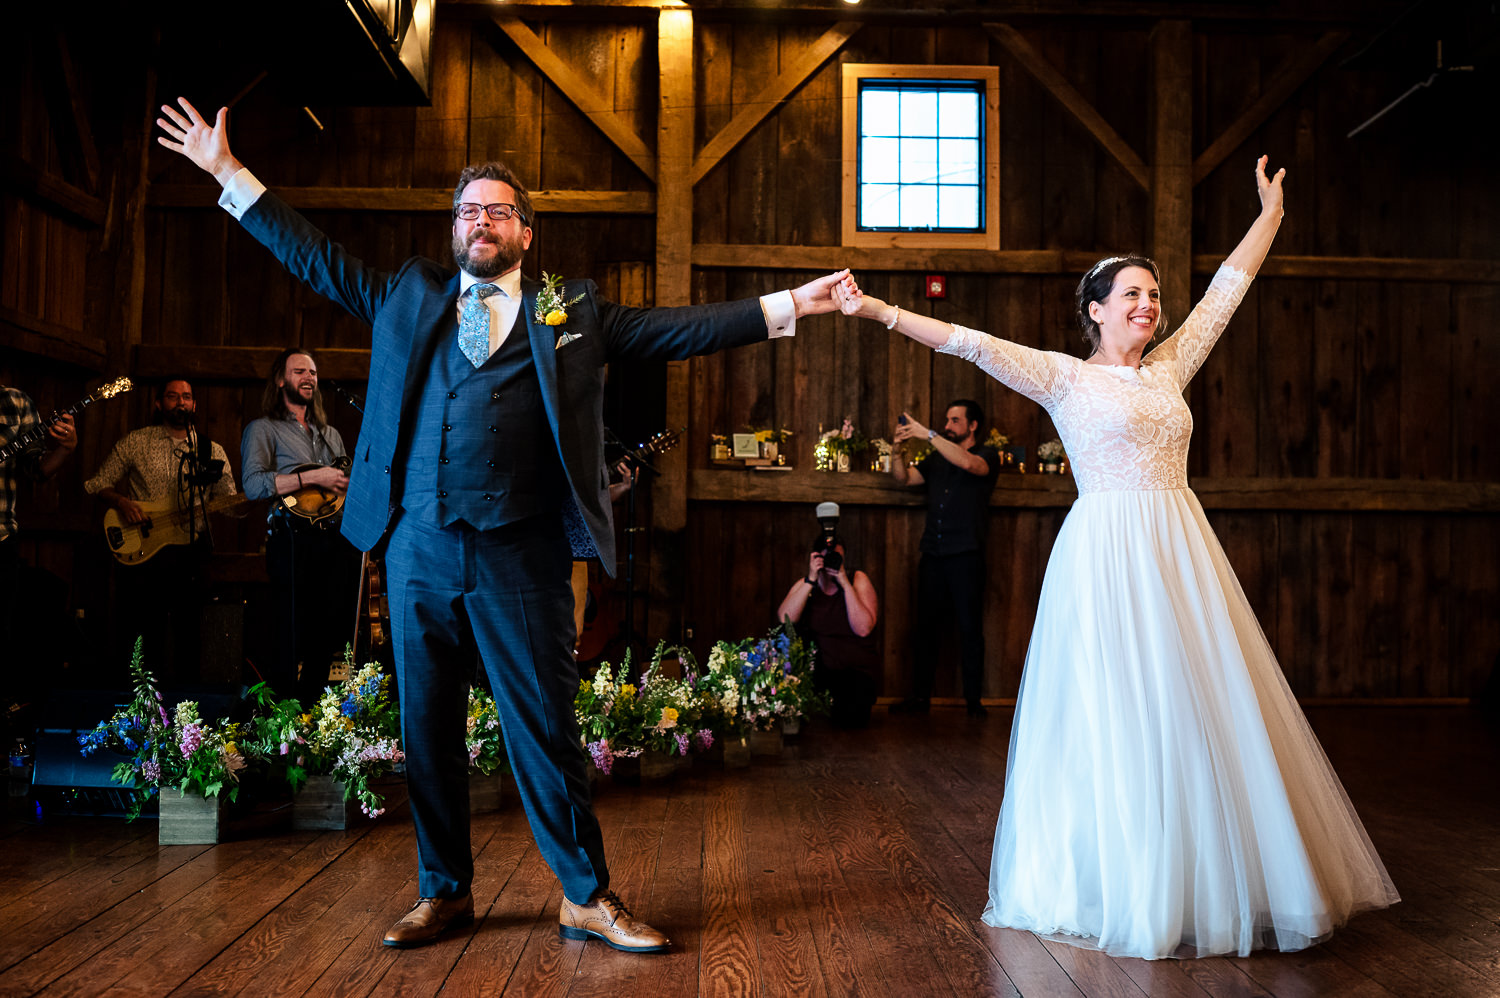 Anne and Jed holding hands on the dance floor of their Vermont wedding barn